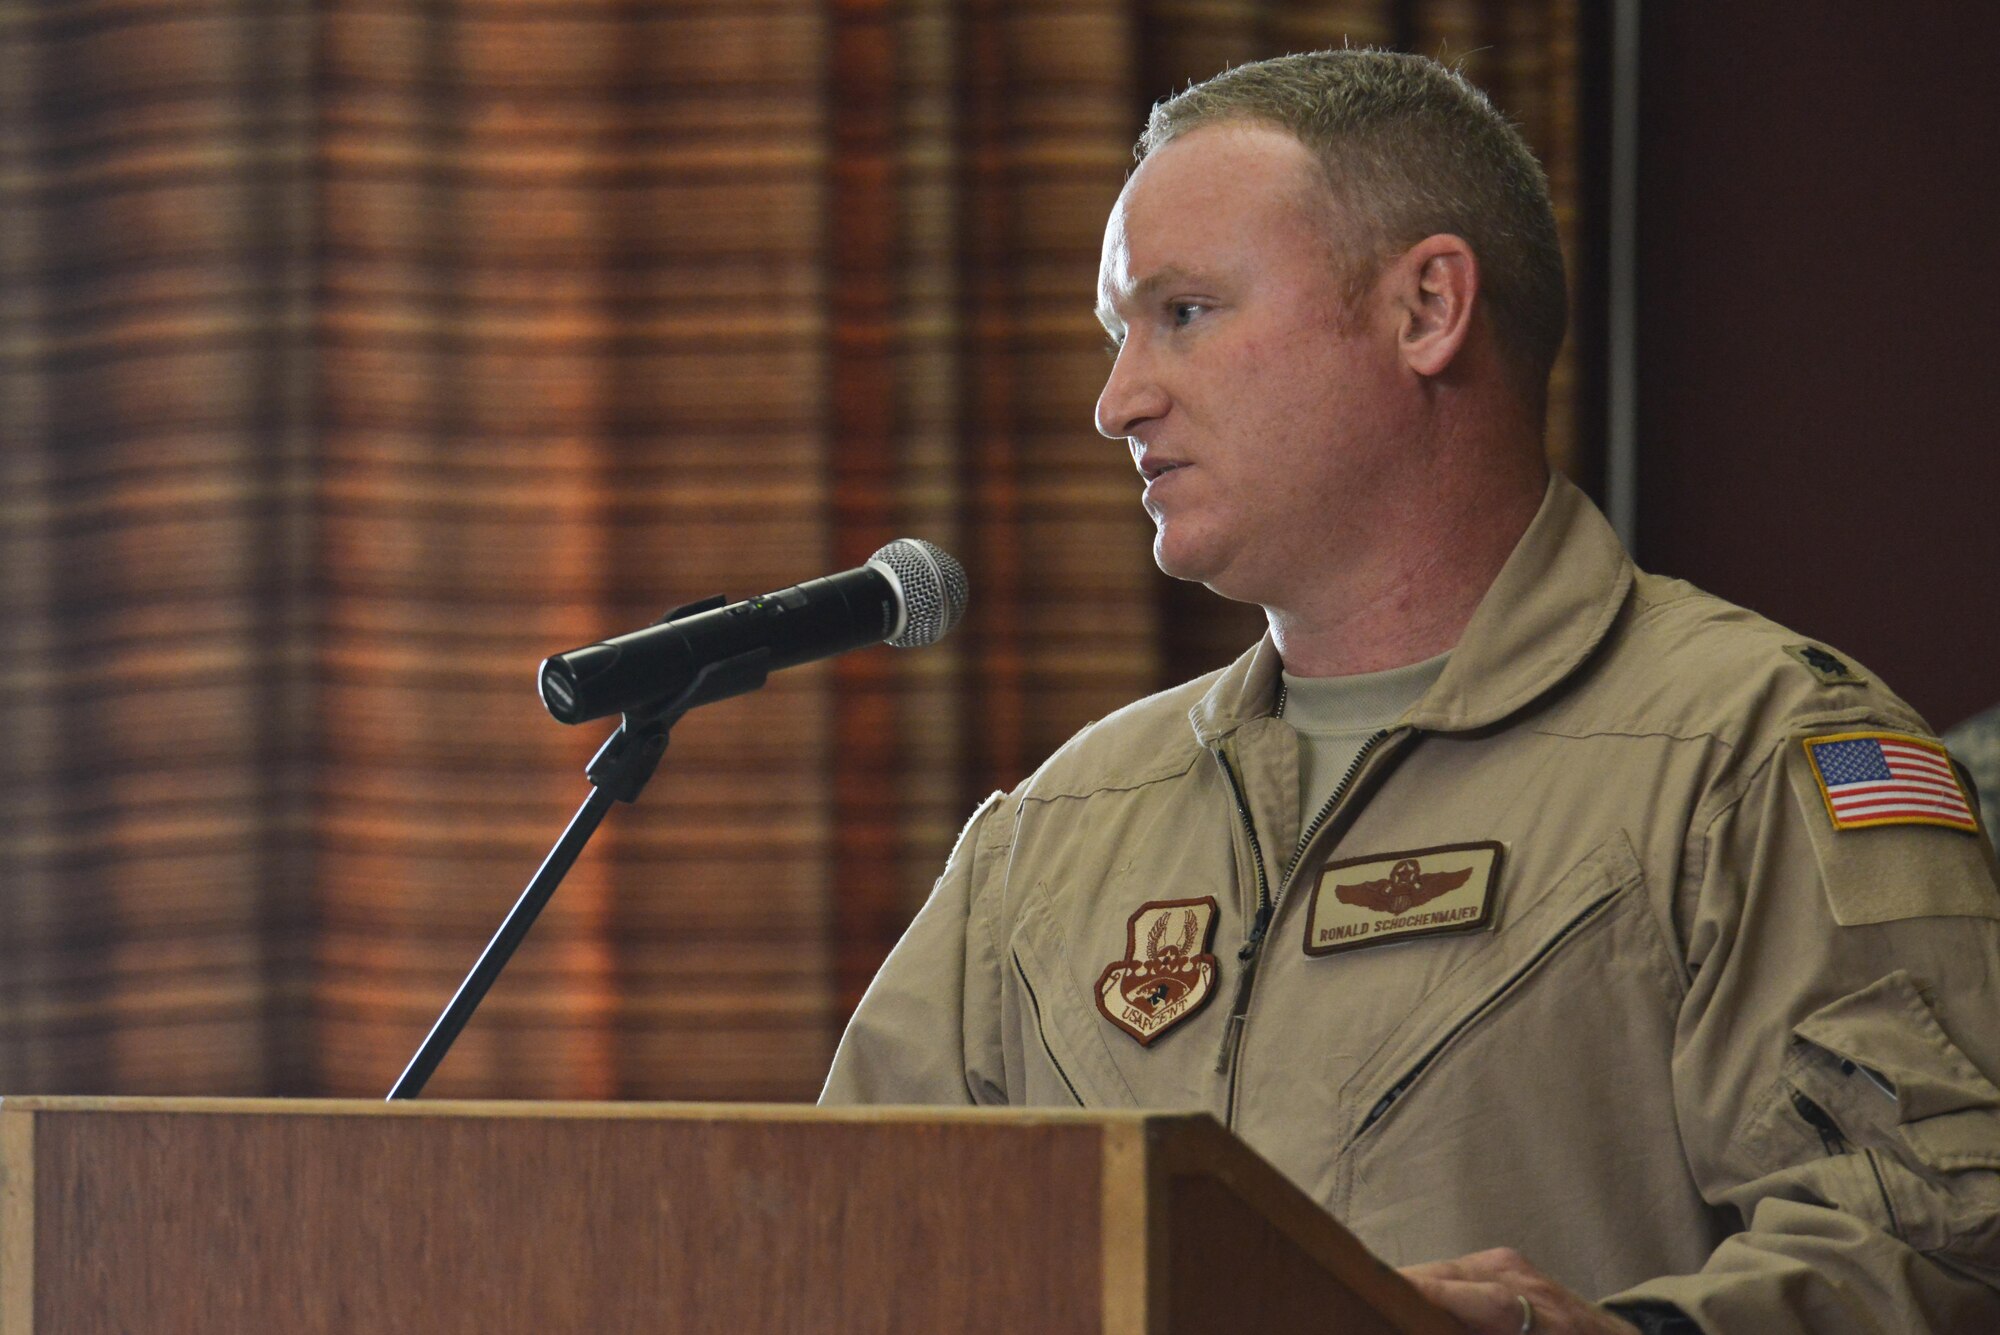 Lt. Col Ronald Schochenmaier, 22d Expeditionary Air Refueling Squadron commander, gives a few remarks during his assumption of command ceremony for the 22d EARS July 24th 2015 at Al Udeid Air Base, Qatar. The 22d was first formed in 1939 primarily as a bomb squadron for World War II. In 2002 it was inactivated as the 22d Air Refueling Squadron and is now re-designated as the 22d EARS supporting operations from Al Udeid Air Base. (U.S. Air Force photo/Staff Sgt. Alexandre Montes)